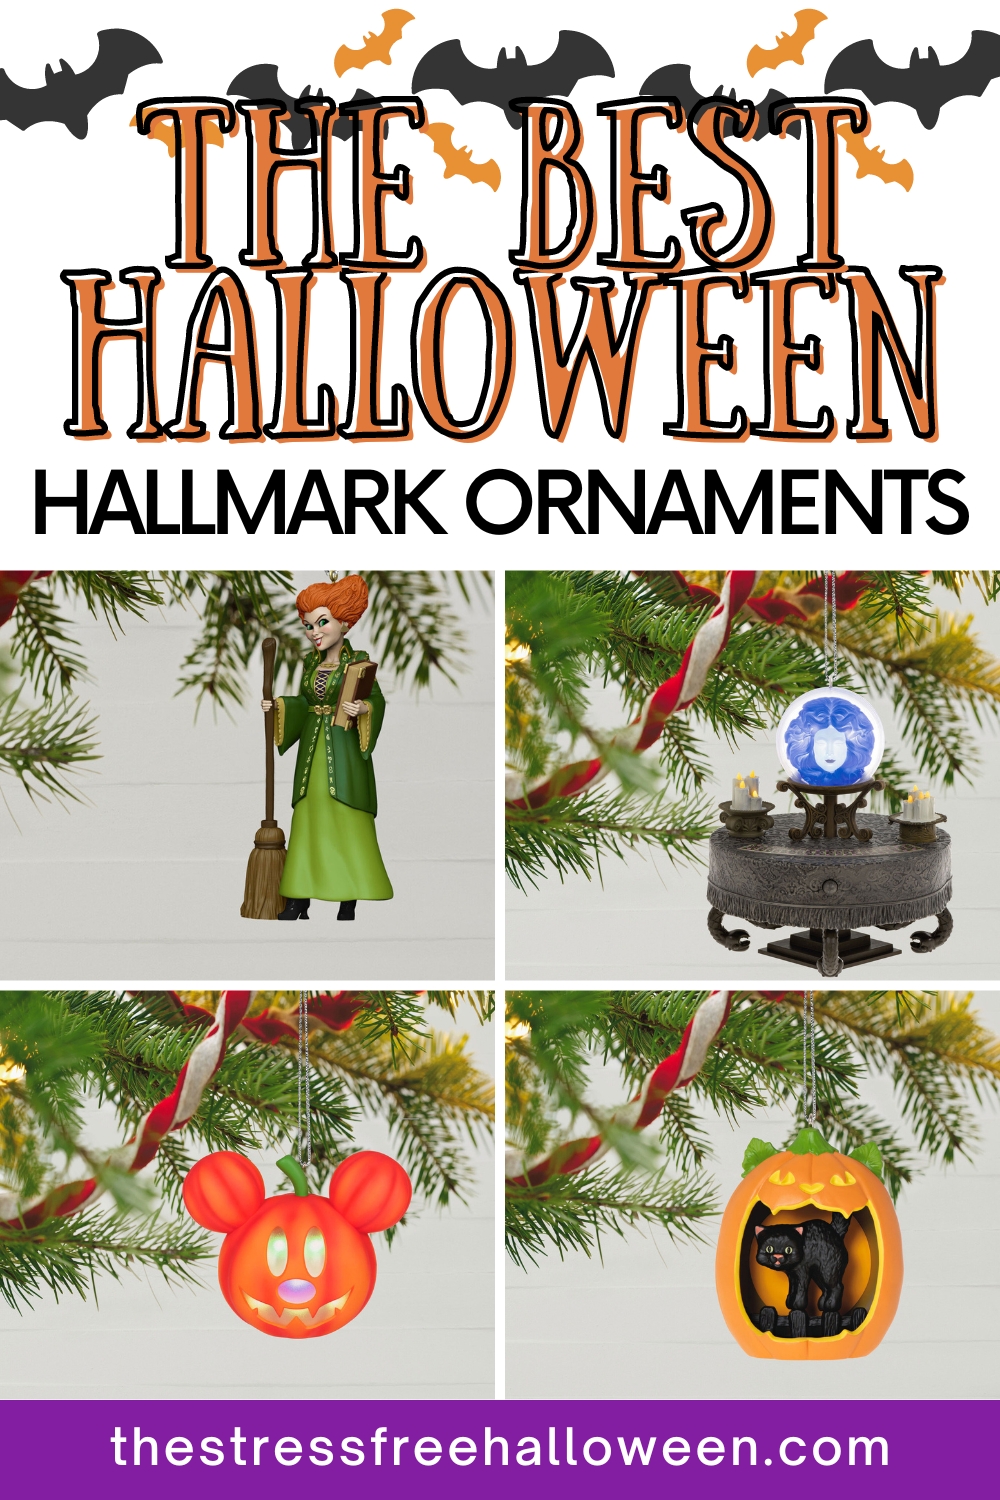 collage of Hallmark Halloween ornaments with text The Best Halloween Hallmark Ornaments